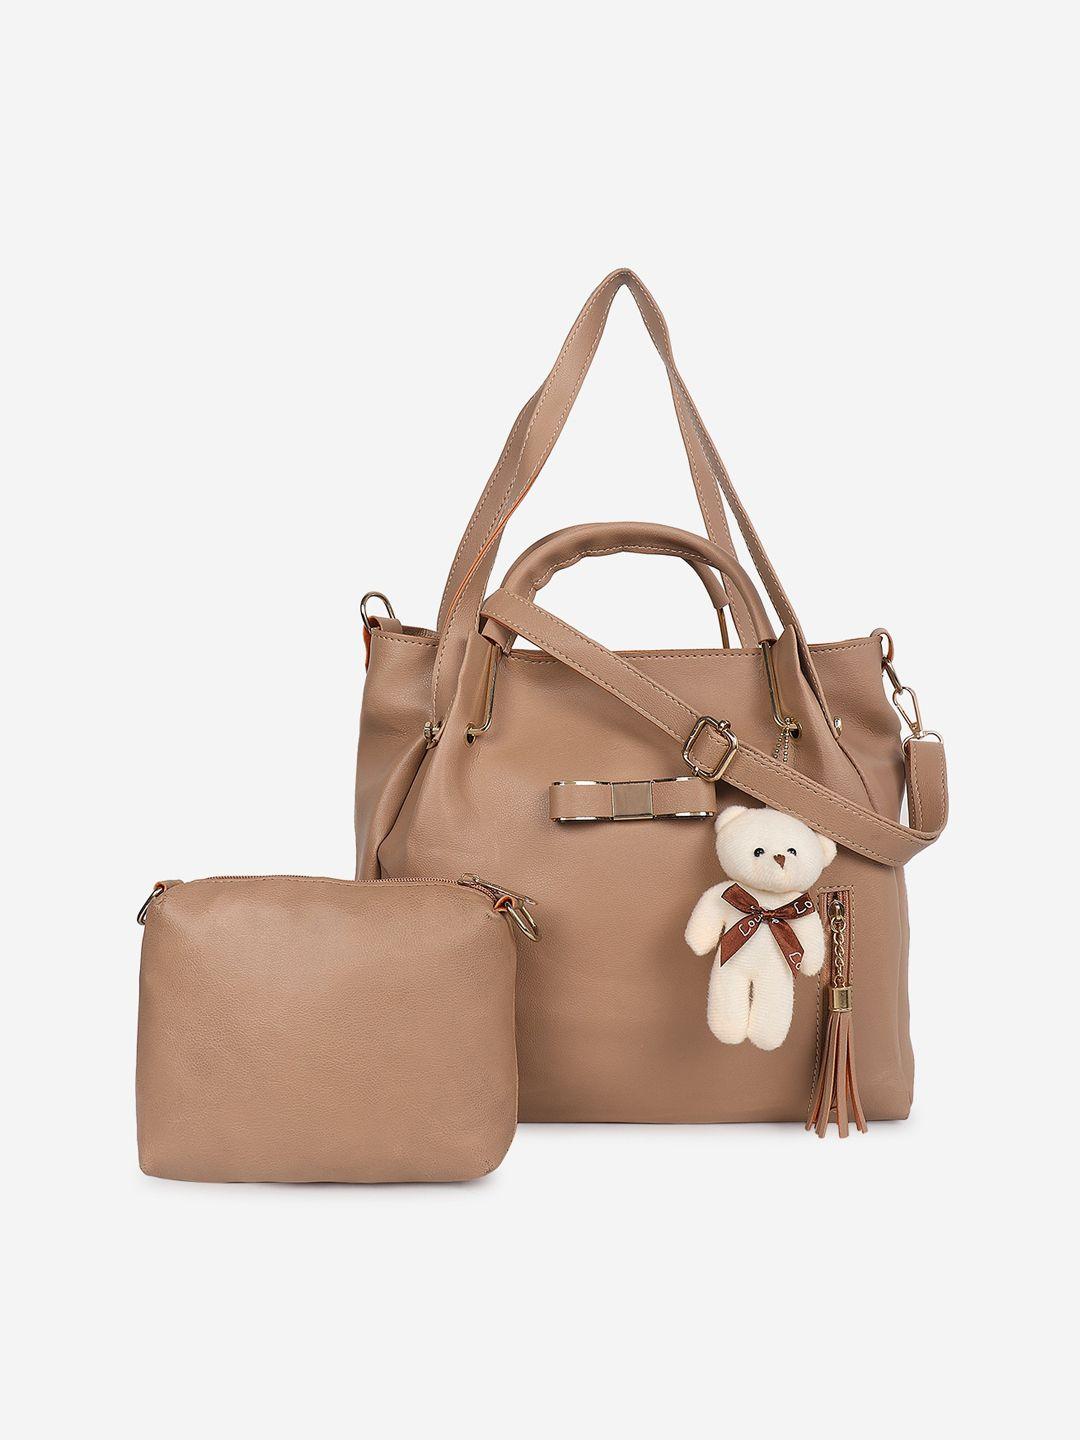 stropcarry beige structured shoulder bag with pouch